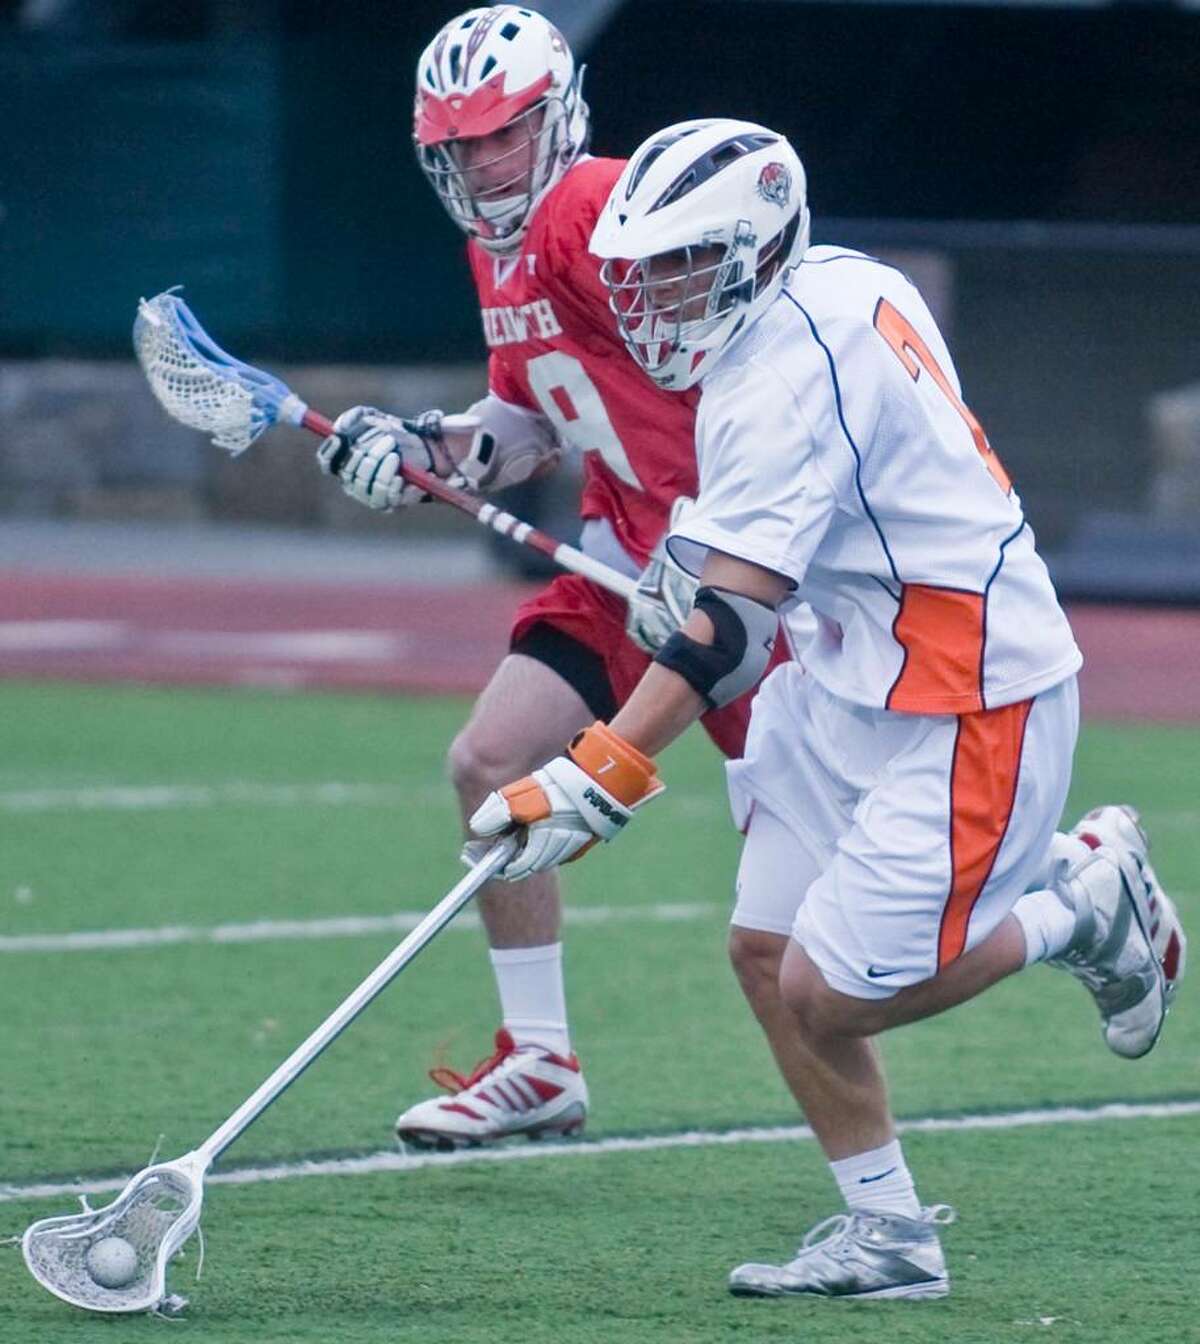 Greenwich High's Stephen Dodd and Ridgefield's Sean Riley pace each other during a boys lacrosse game at Ridgefield. Tuesday, April 27, 2010